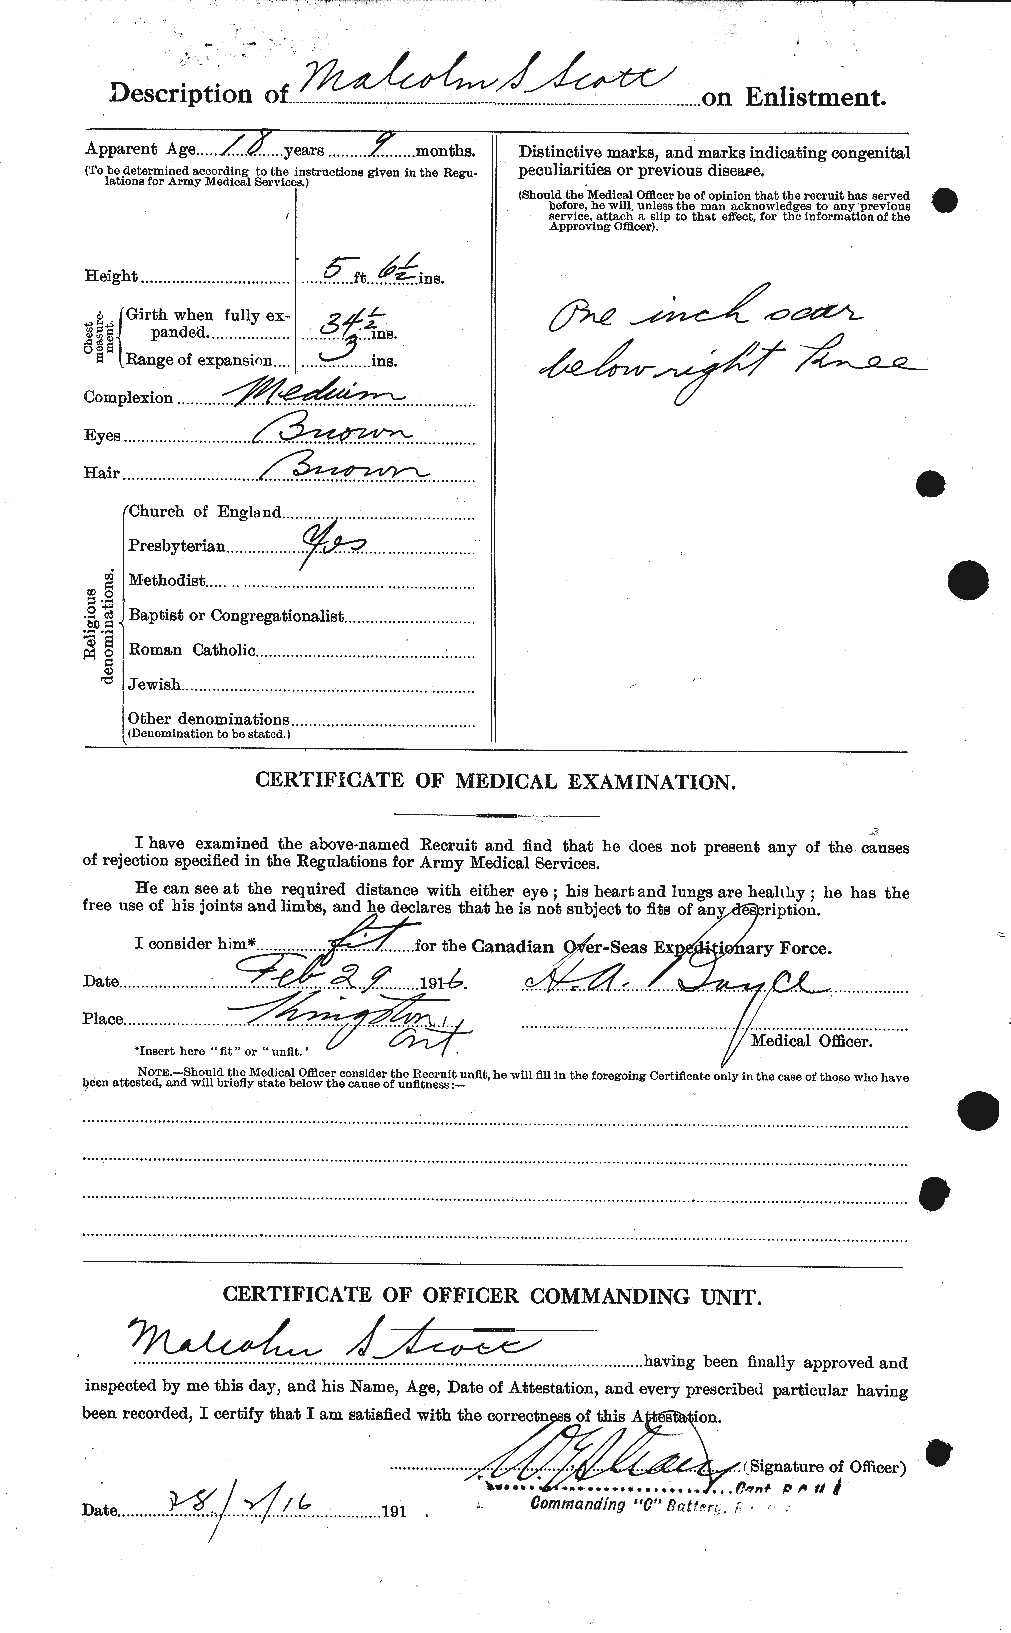 Personnel Records of the First World War - CEF 083513b